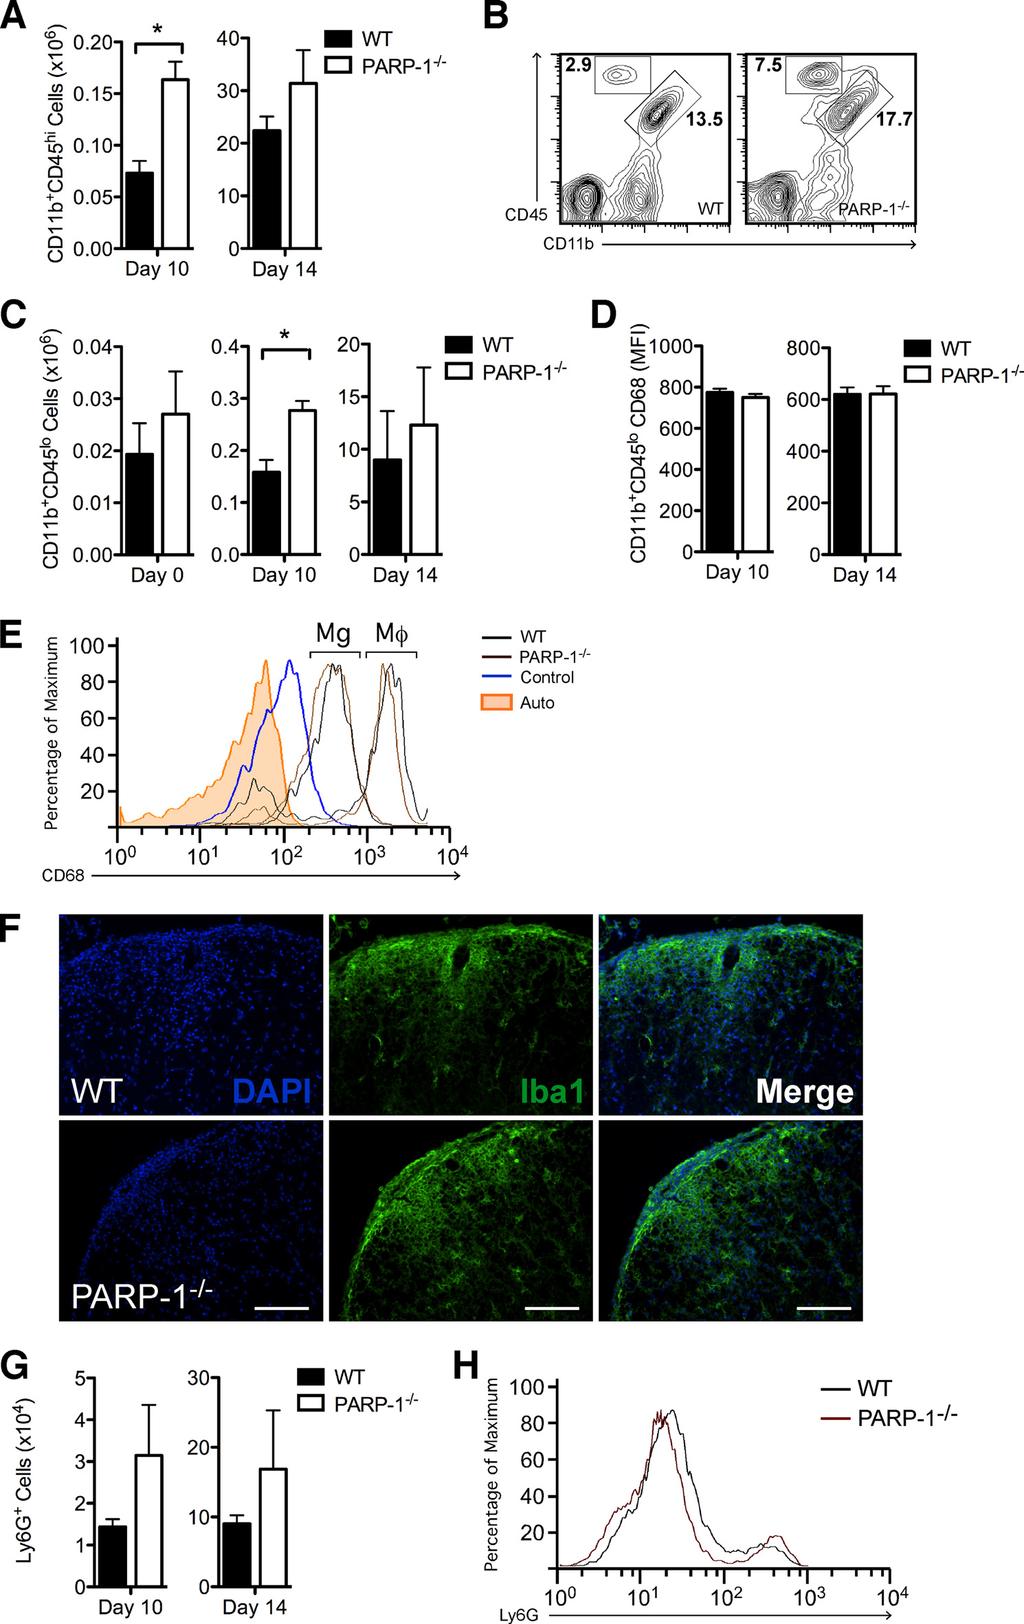 PARP-1 and Multiple Sclerosis with Day 0 controls (Fig. 9C), suggesting a previously unknown role for PARP-3 in EAE.